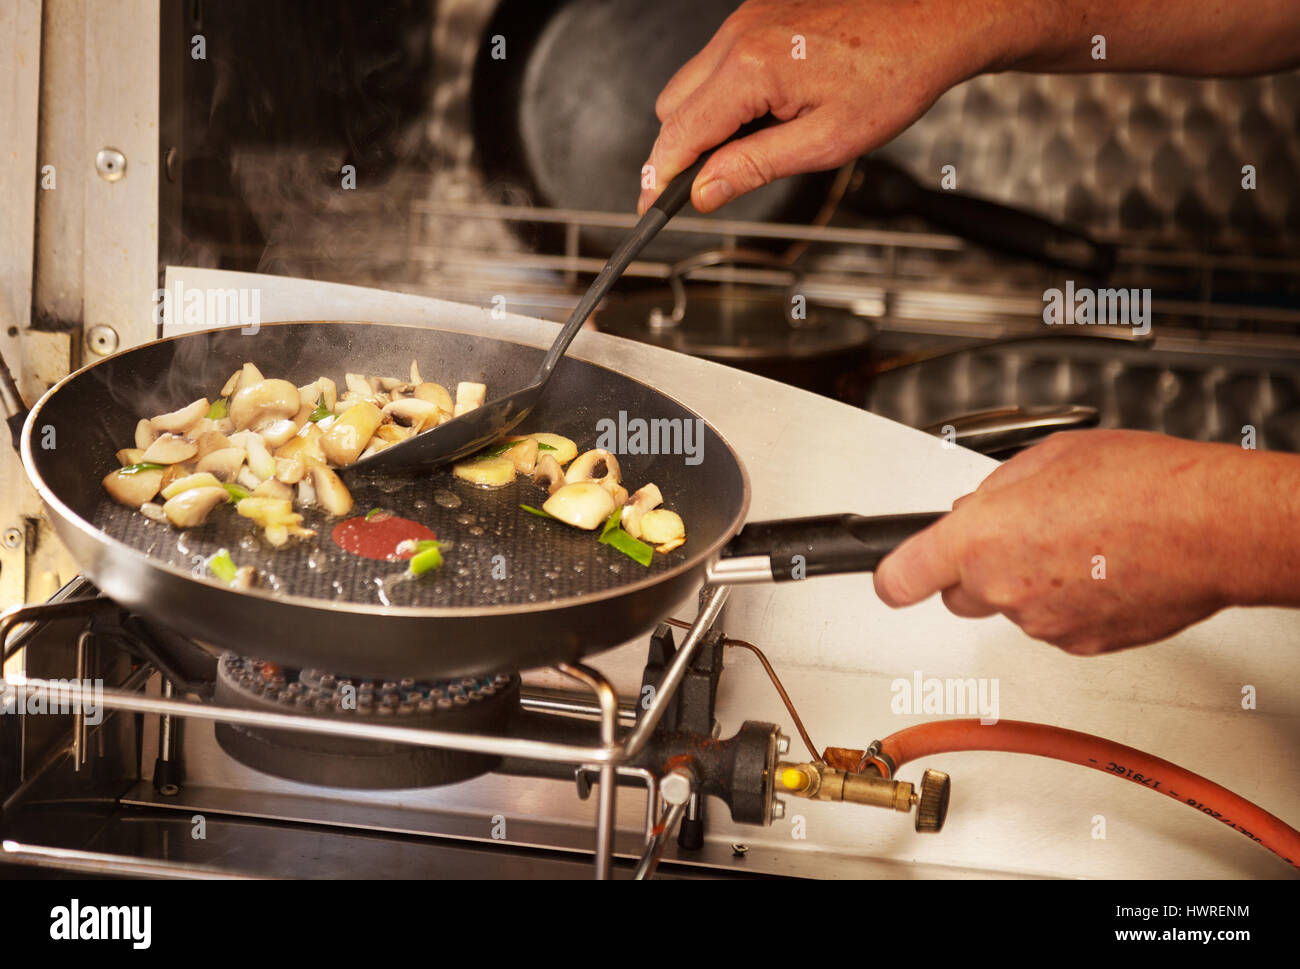 Frying vegetables in a frying pan on a calor gas stove, UK Stock Photo